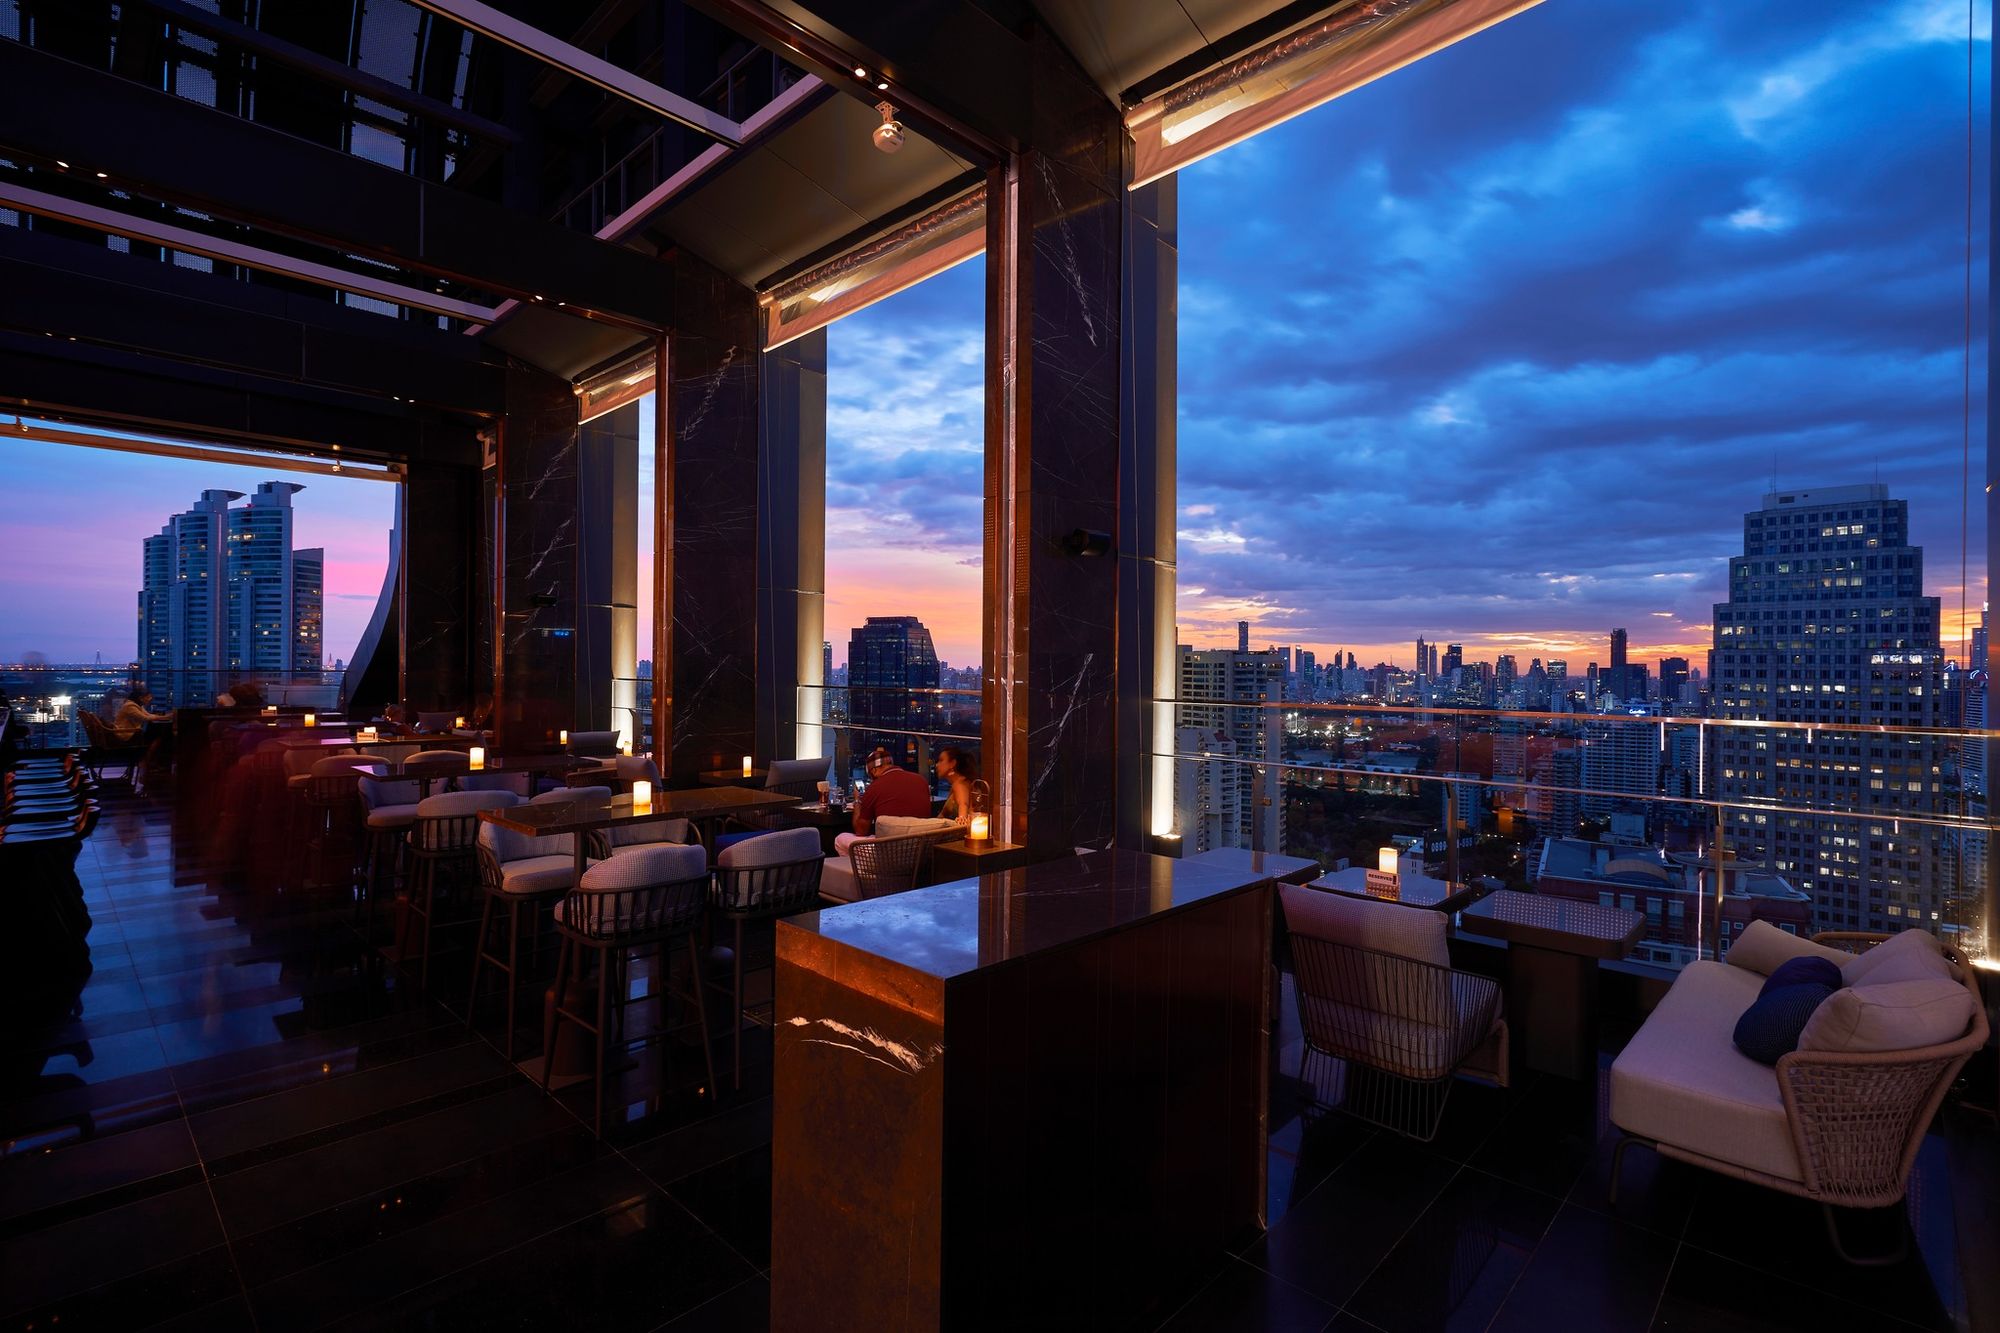 The Cooling Tower Rooftop Bar offers a world of serenity, sophistication and much more.